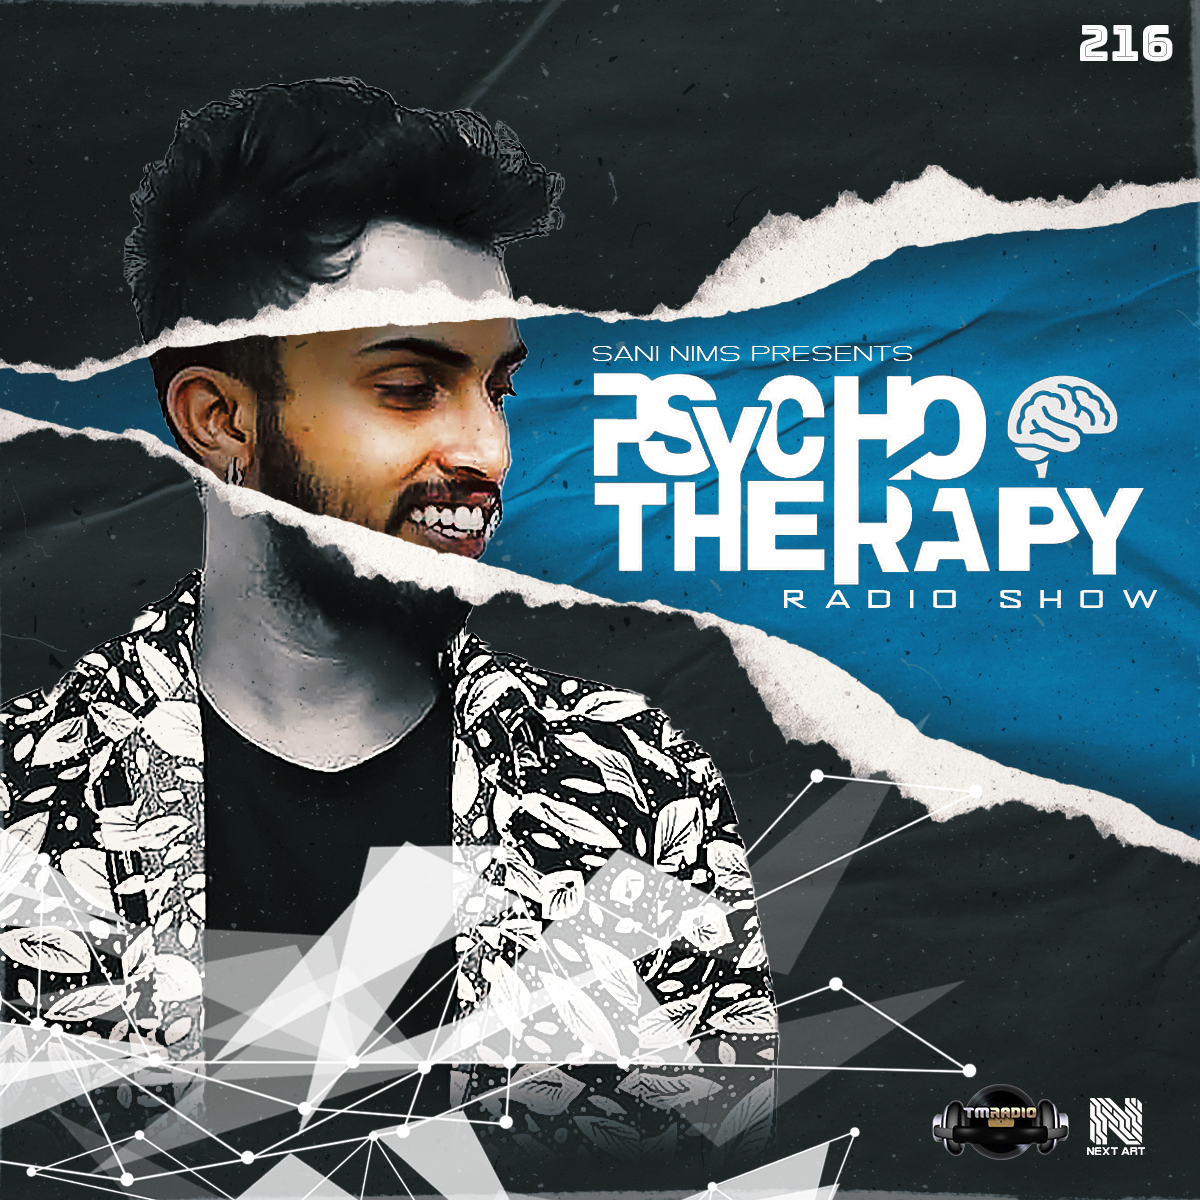 Psycho Therapy :: PSYCHO THERAPY EP 216 BY SANI NIMS ON TM RADIO (aired on November 23rd) banner logo